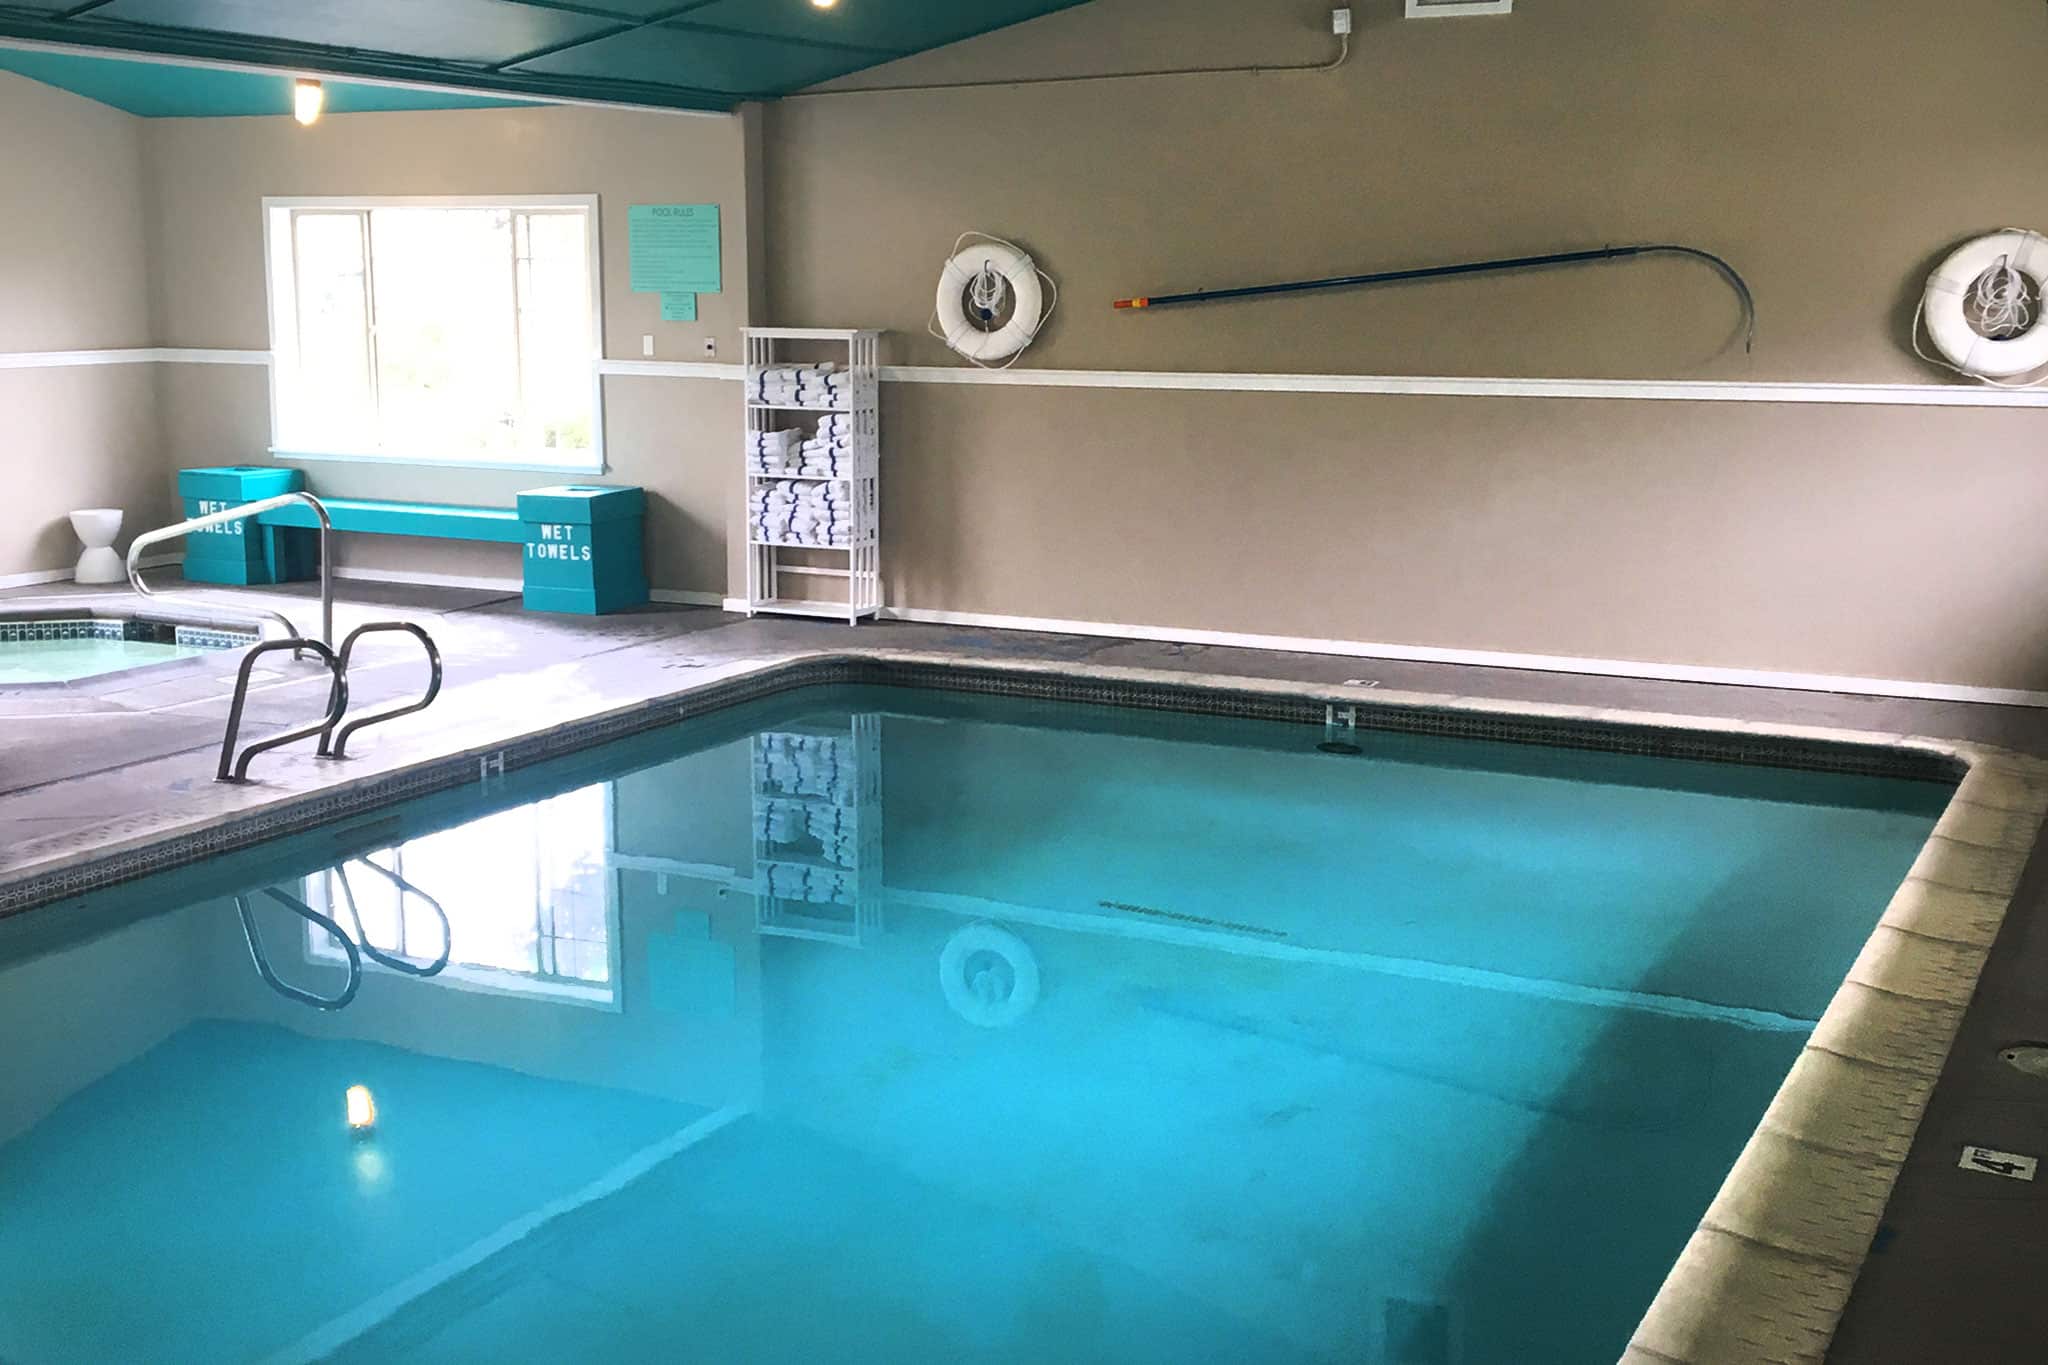 Hotel with a pool in Seaside, Oregon